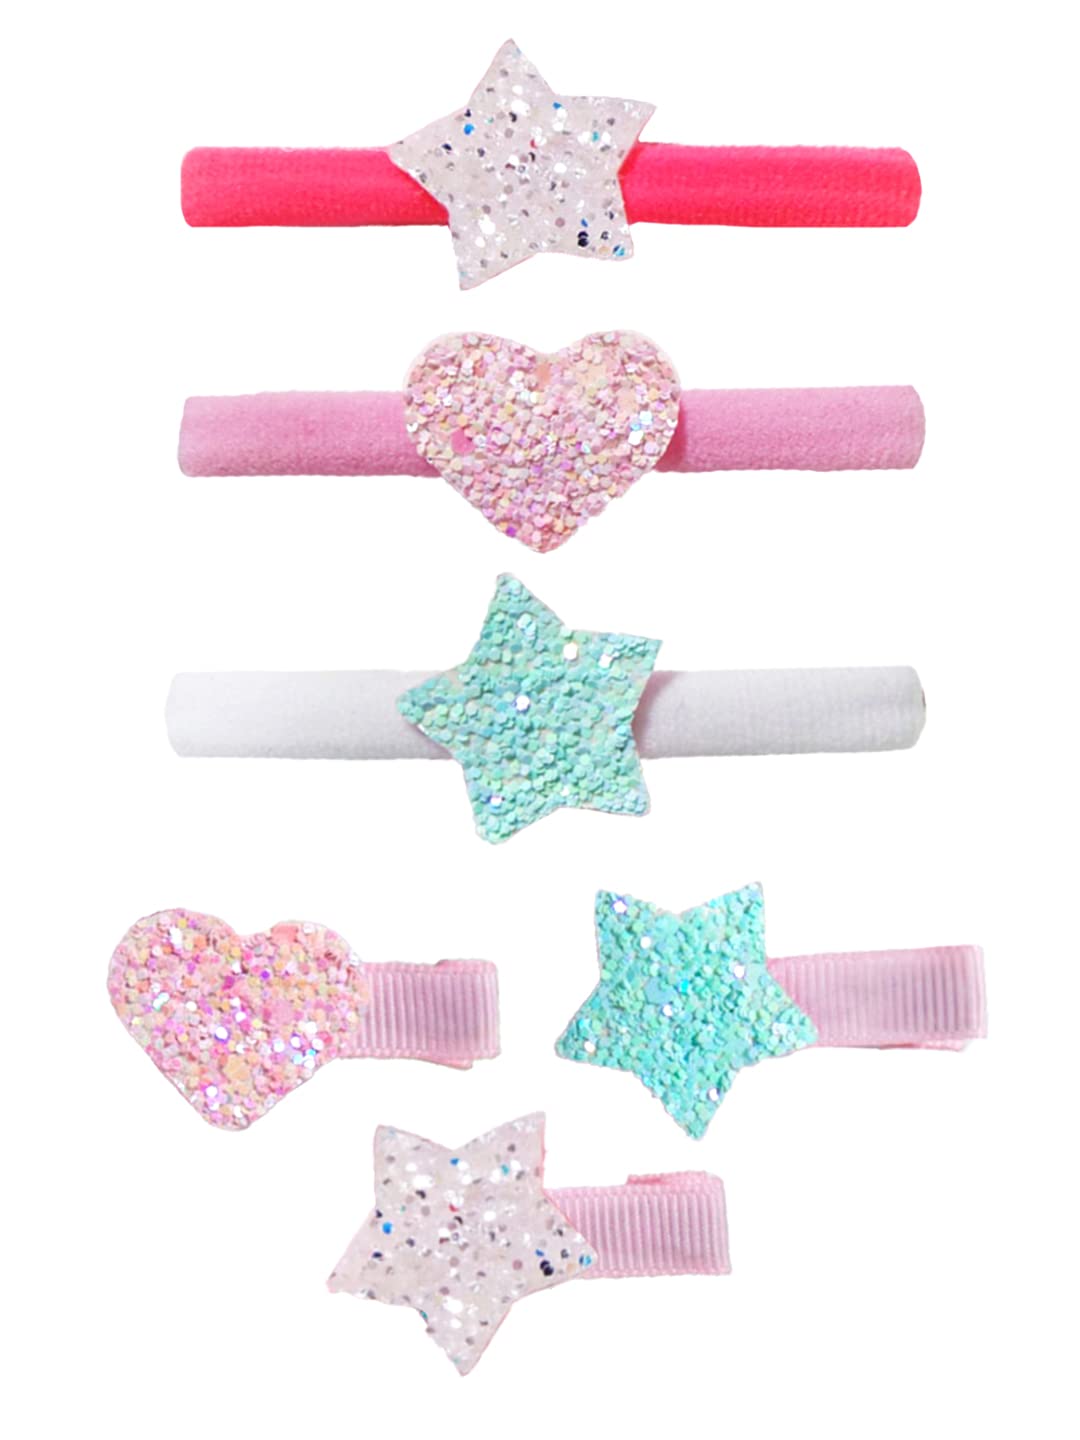 Melbees by Yellow Chimes 6 pcs Hair Clips Hair Band for Kids with Glittering Star Heart Charms Hair Accessories Pretty Snap Hairpins Hair Ties for Kids Girls (Pack of 6), Multi-Color, Medium (YCHACLRB-KD004-MC)